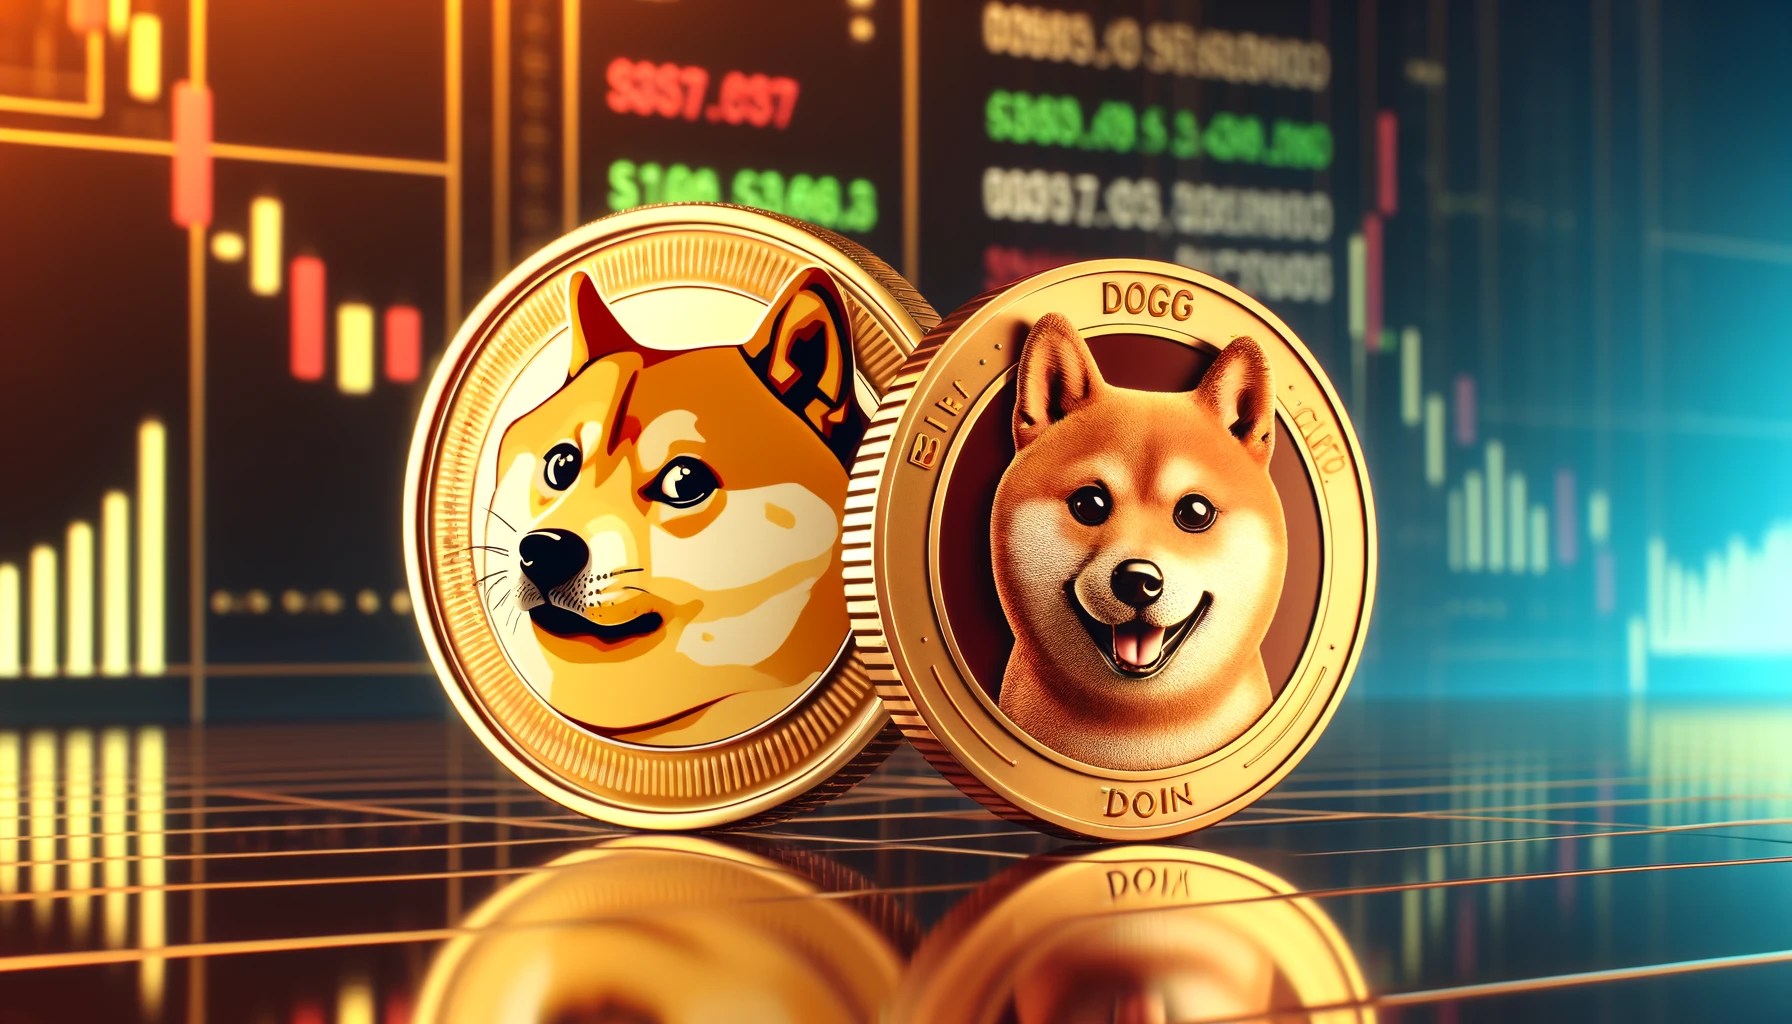 Machine Learning Algorithm Predicts Dogecoin And Shiba Inu Price For